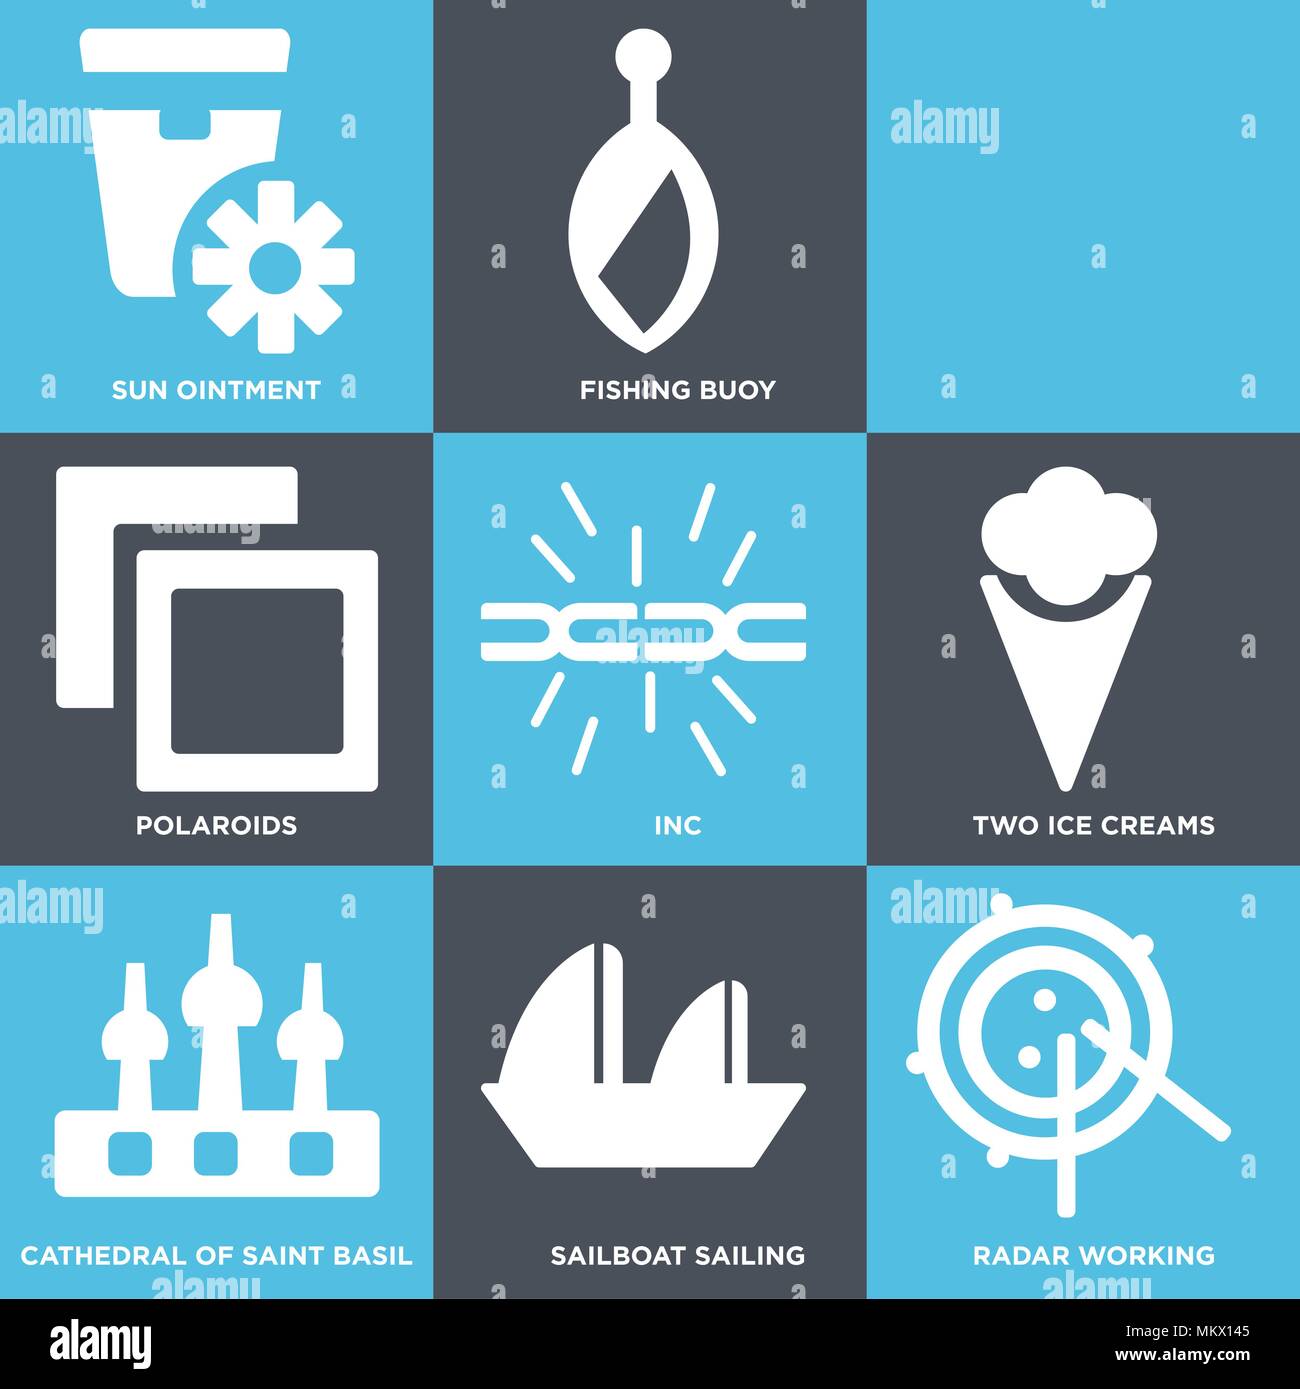 Set Of 9 simple editable icons such as Radar Working, Sailboat Sailing, Cathedral of saint basil, Two Ice Creams, Inc, Polaroids, Message In a Bottle  Stock Vector